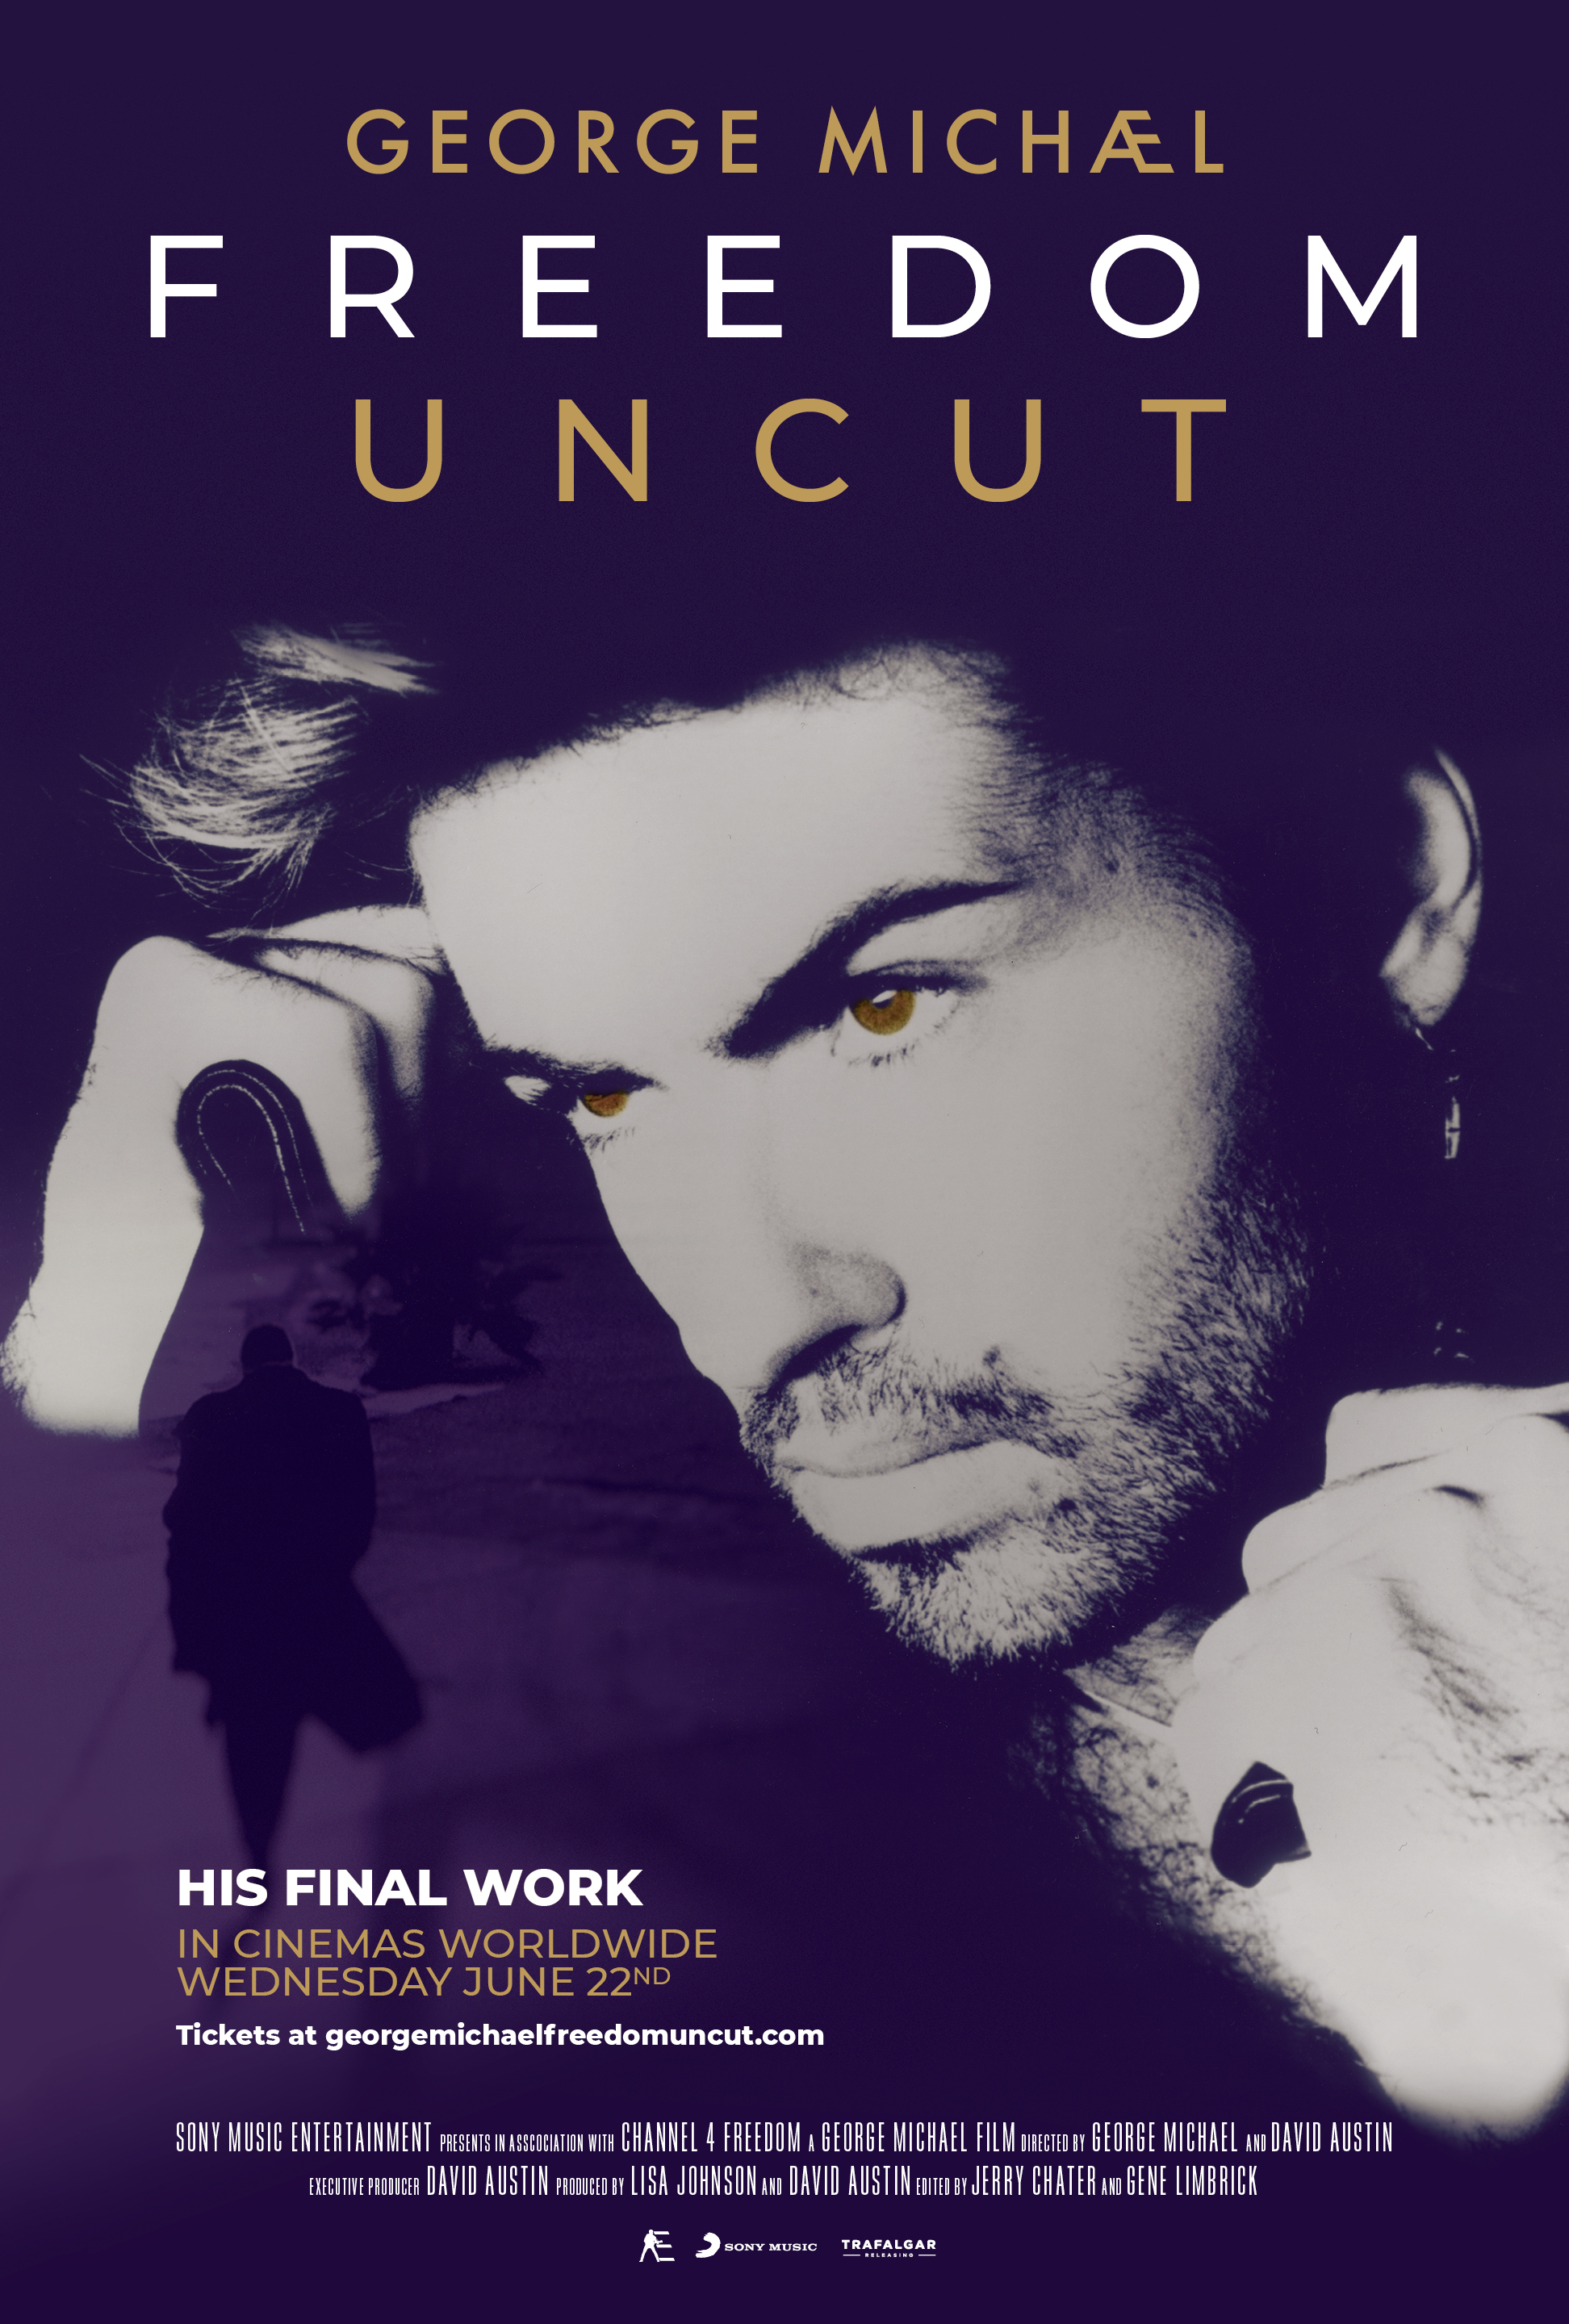 Movie poster for "George Michael Freedom Uncut". Part of Sony Music's Premium Content Division.